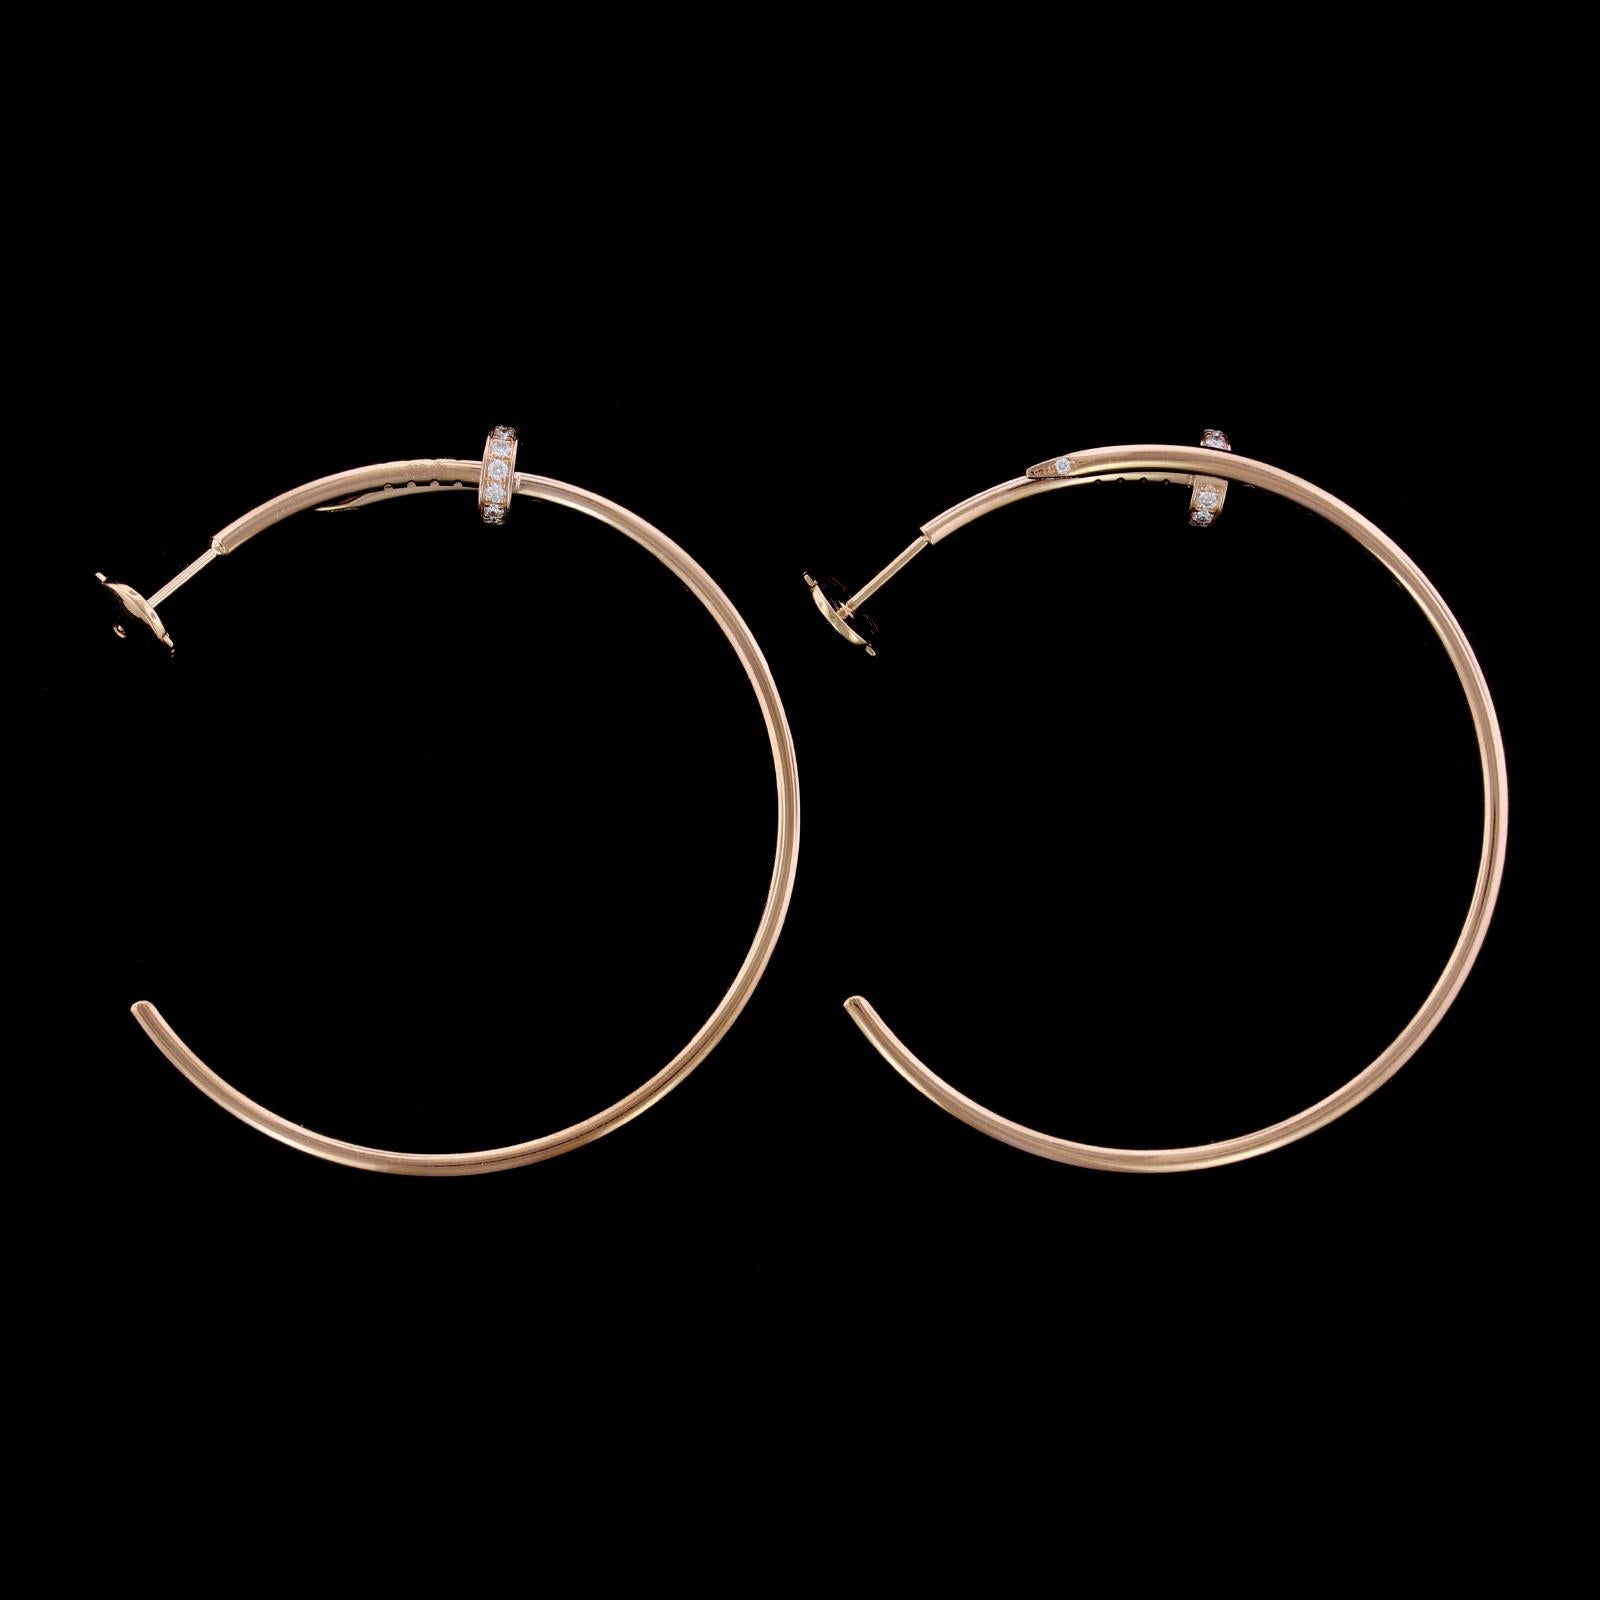 Cartier 18K Pink Gold Diamond Juste un Clou Earrings. The hoop earrings are
set with 28 round brilliant cut diamonds weighing .17cttw., CJZ104, length
1 5/8